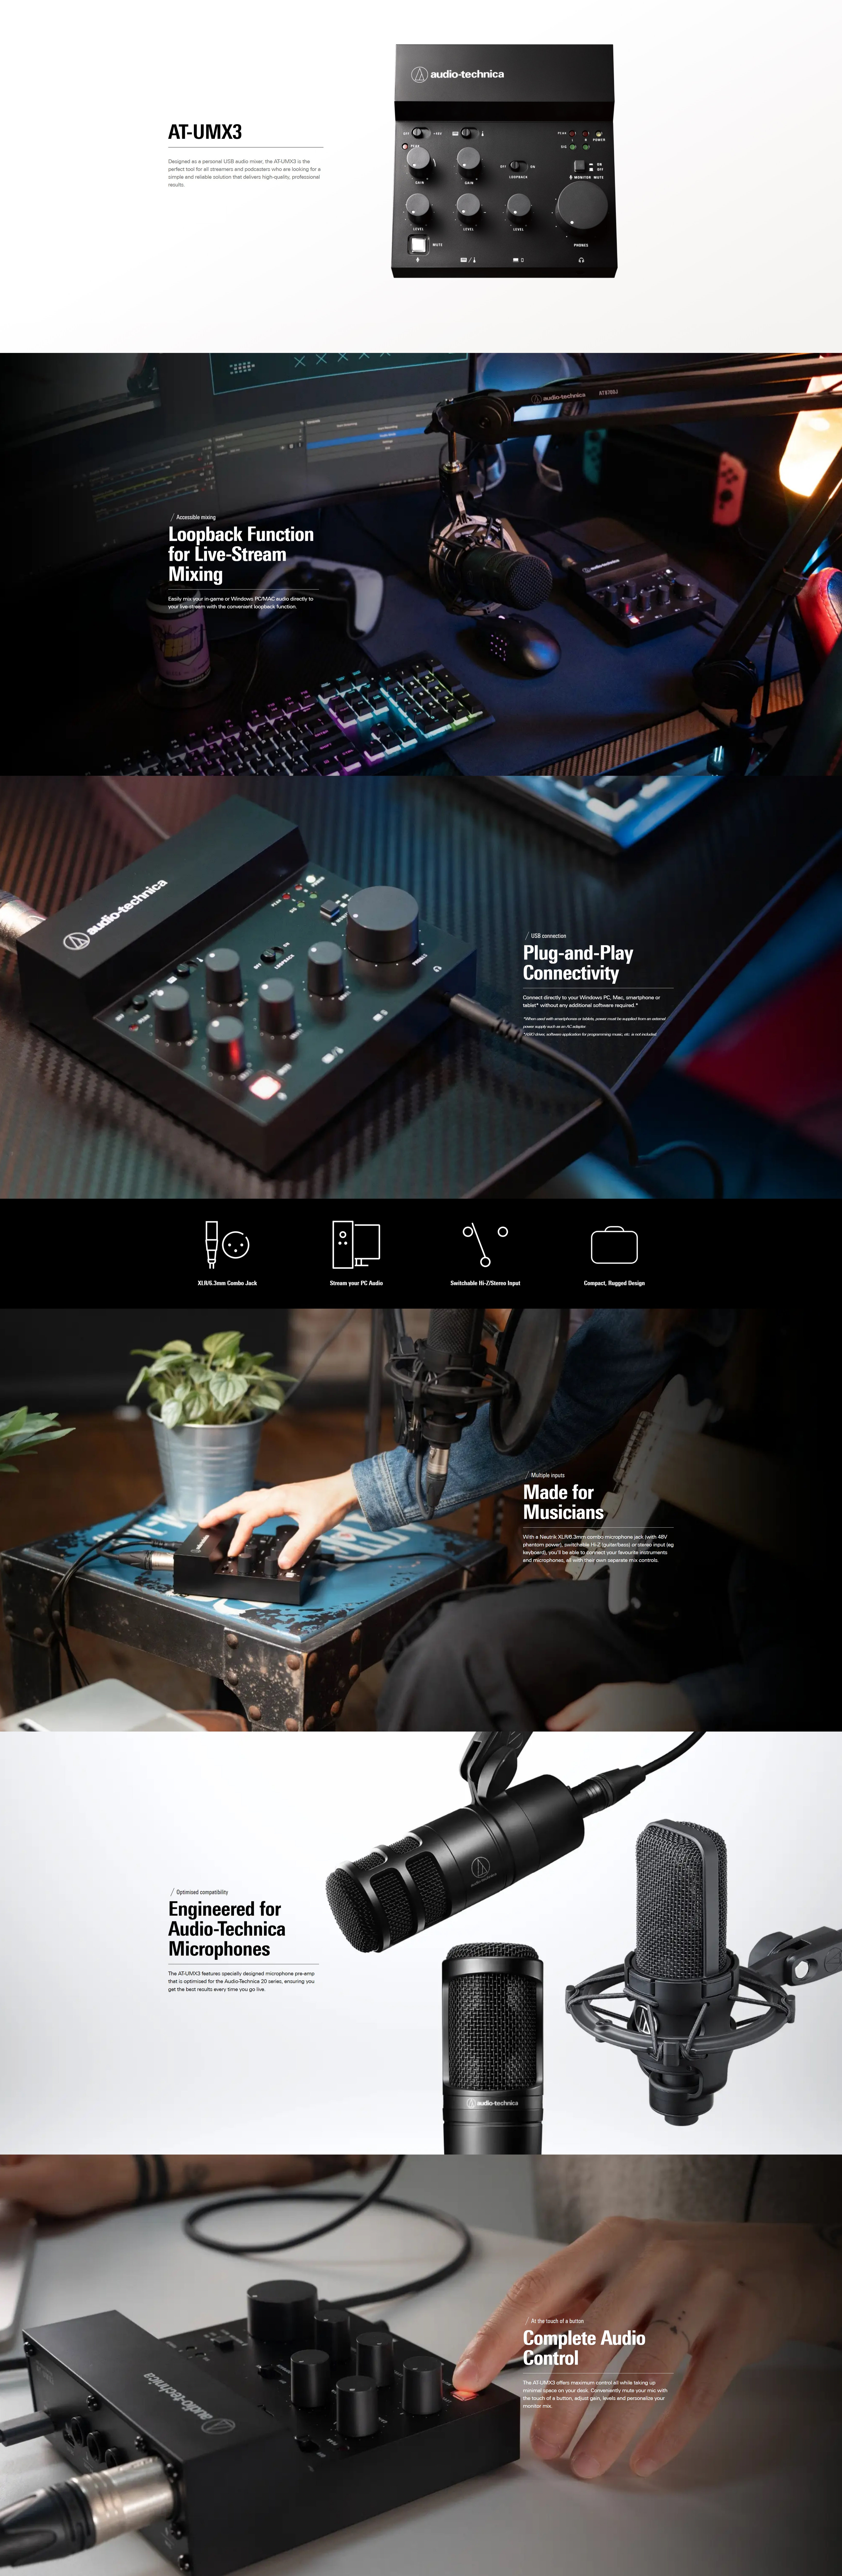 A large marketing image providing additional information about the product Audio Technica AT-UMX3 USB Audio Mixer - Additional alt info not provided